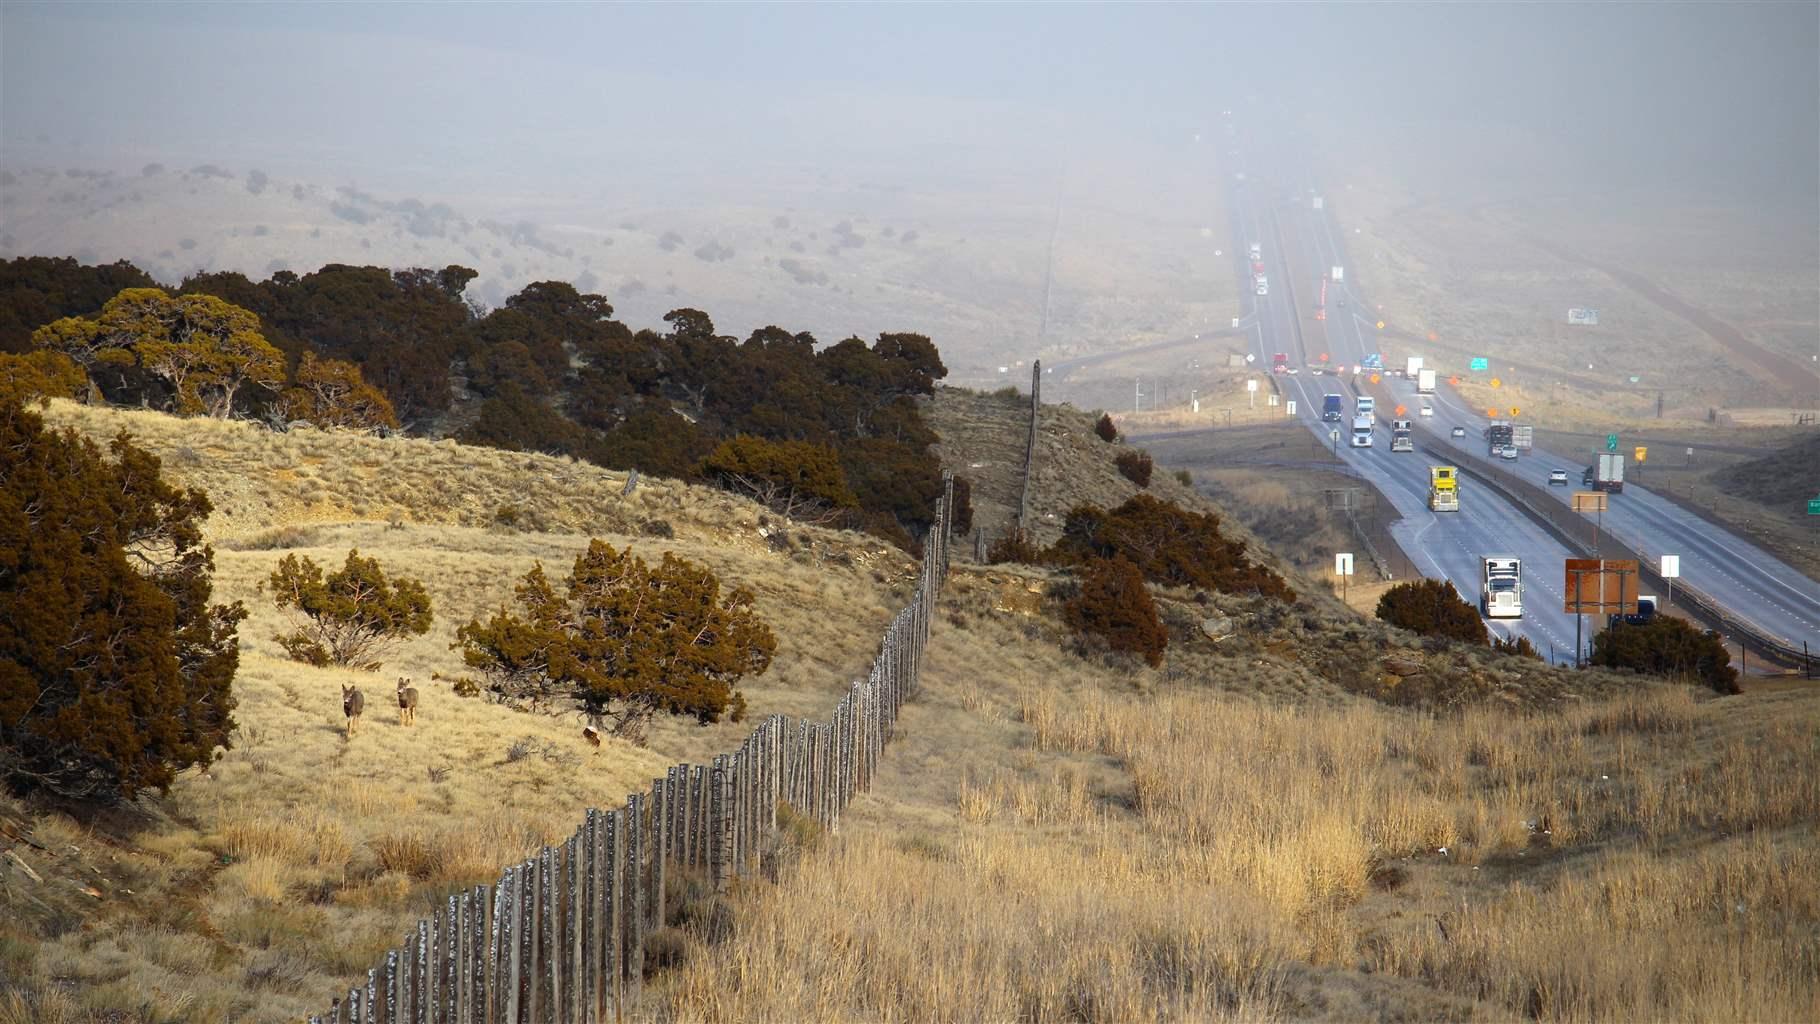 Mule deer walk along tall fencing along I-80 in Wyoming. The highway bisects the herd’s winter range.